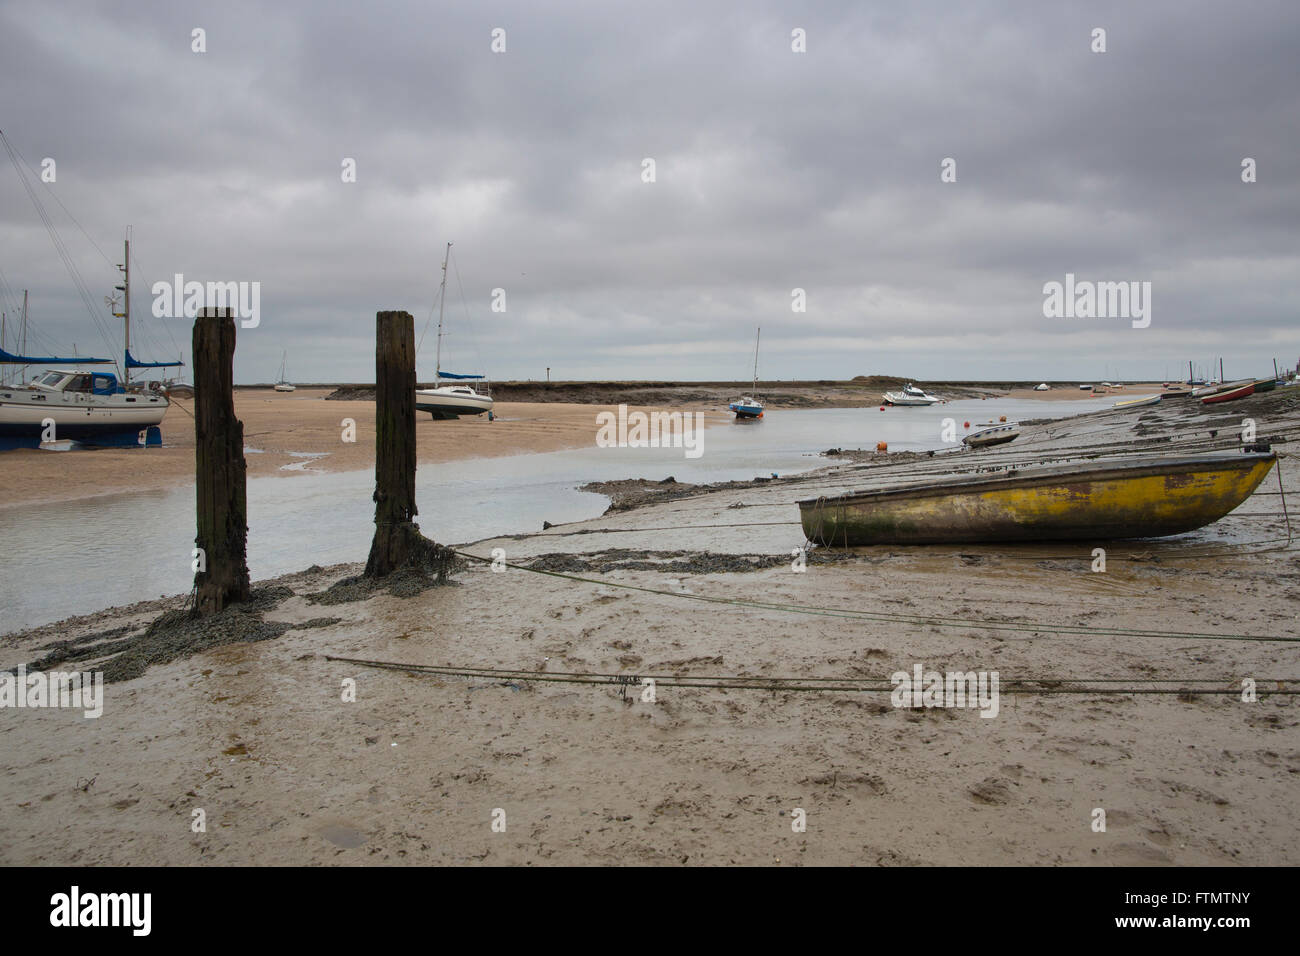 Boats moored at Wells-next-the-sea during low tide looking out towards Blakeney, Norfolk coastline, East Anglia, England, UK Stock Photo